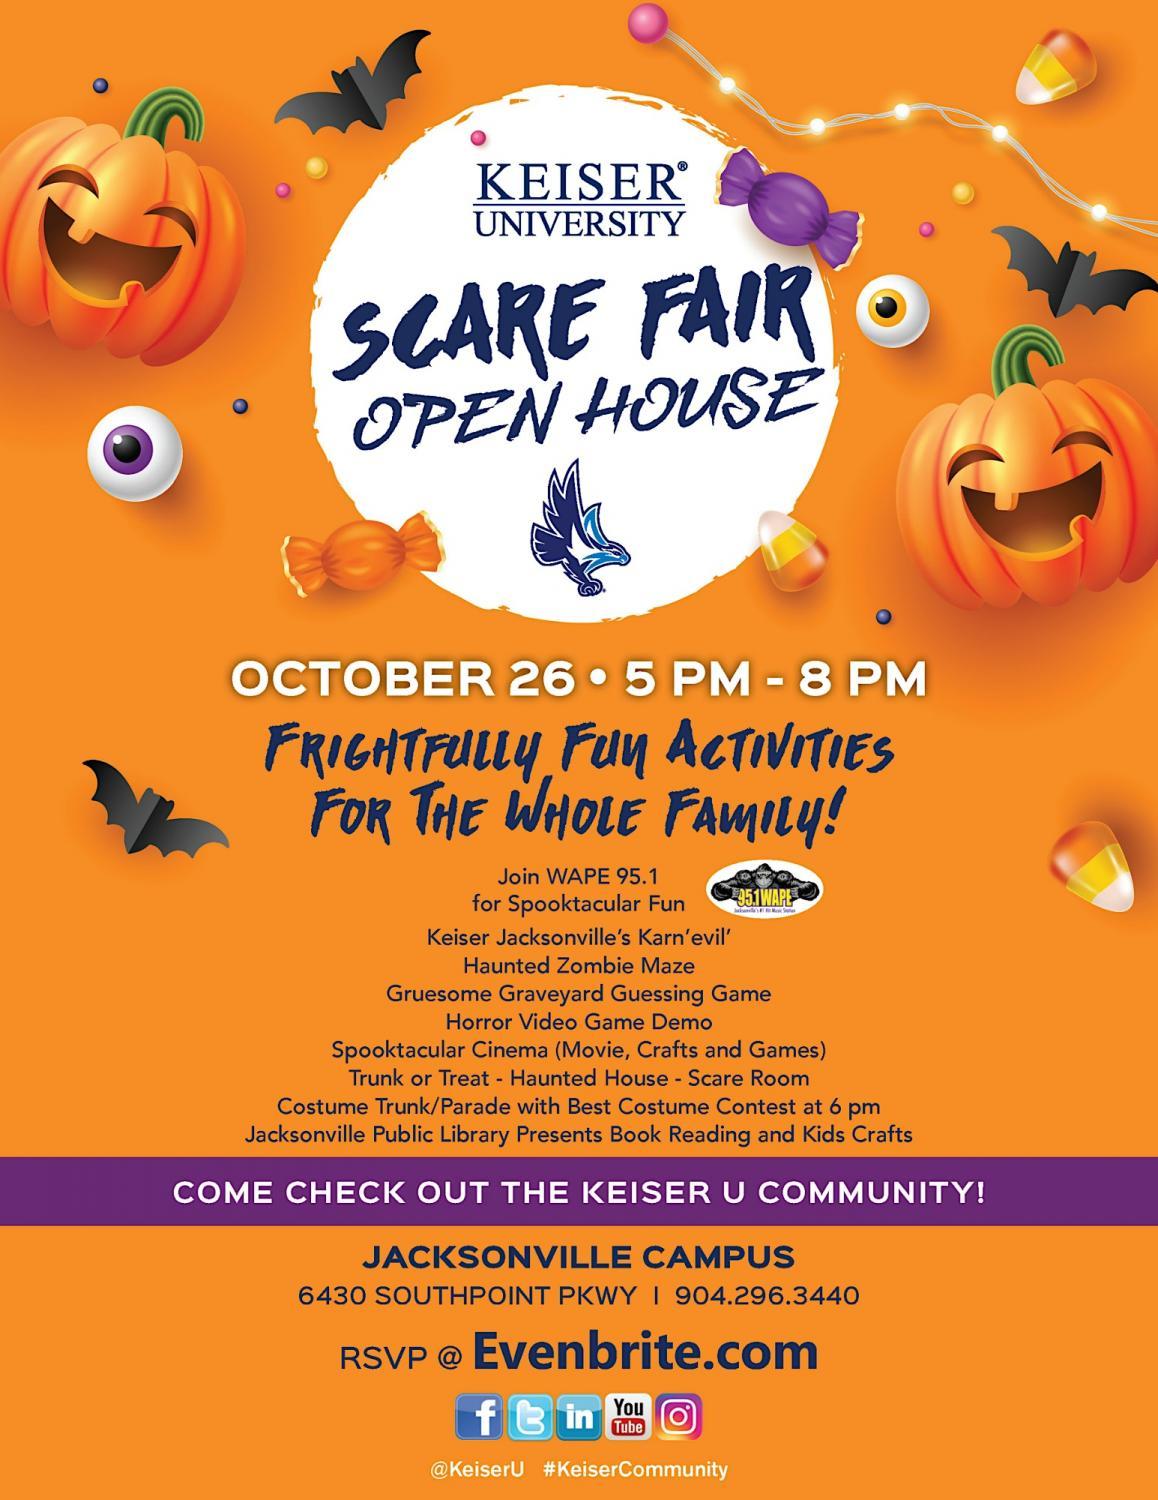 Scare Fair - Open House
Wed Oct 26, 7:00 PM - Wed Oct 26, 7:00 PM
in 7 days